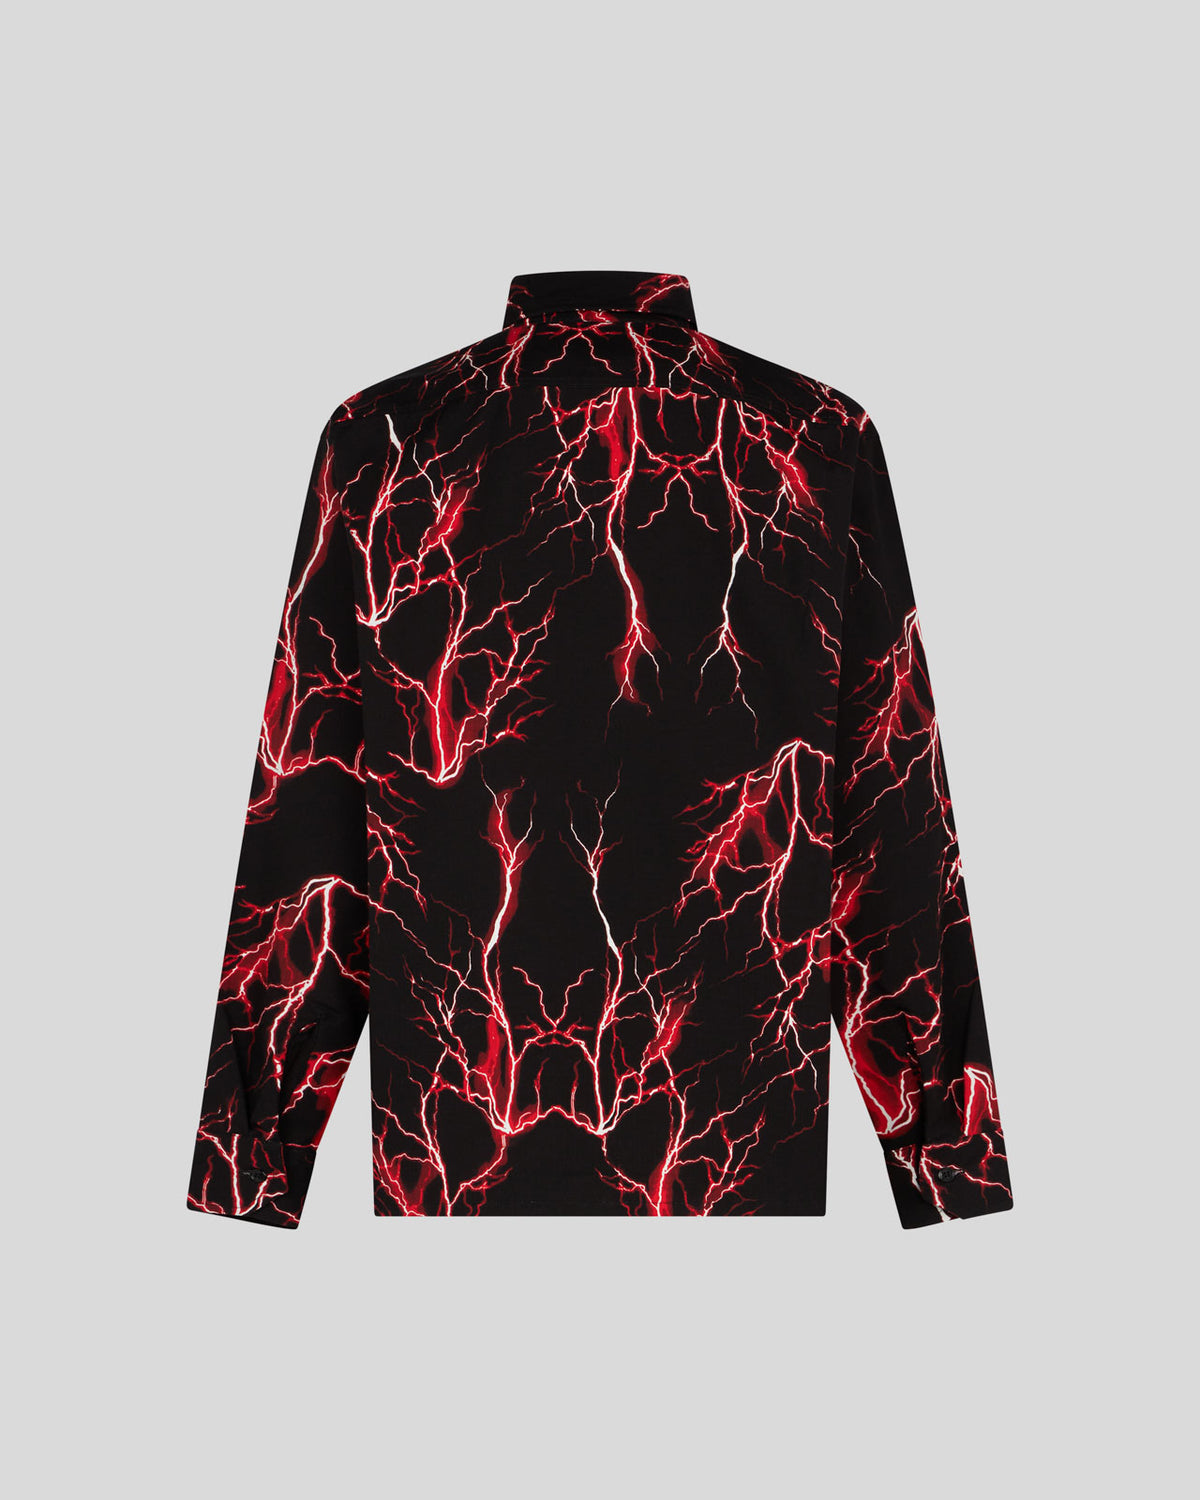 PHOBIA BLACK SHIRT WITH RED ALL OVER LIGHTNING